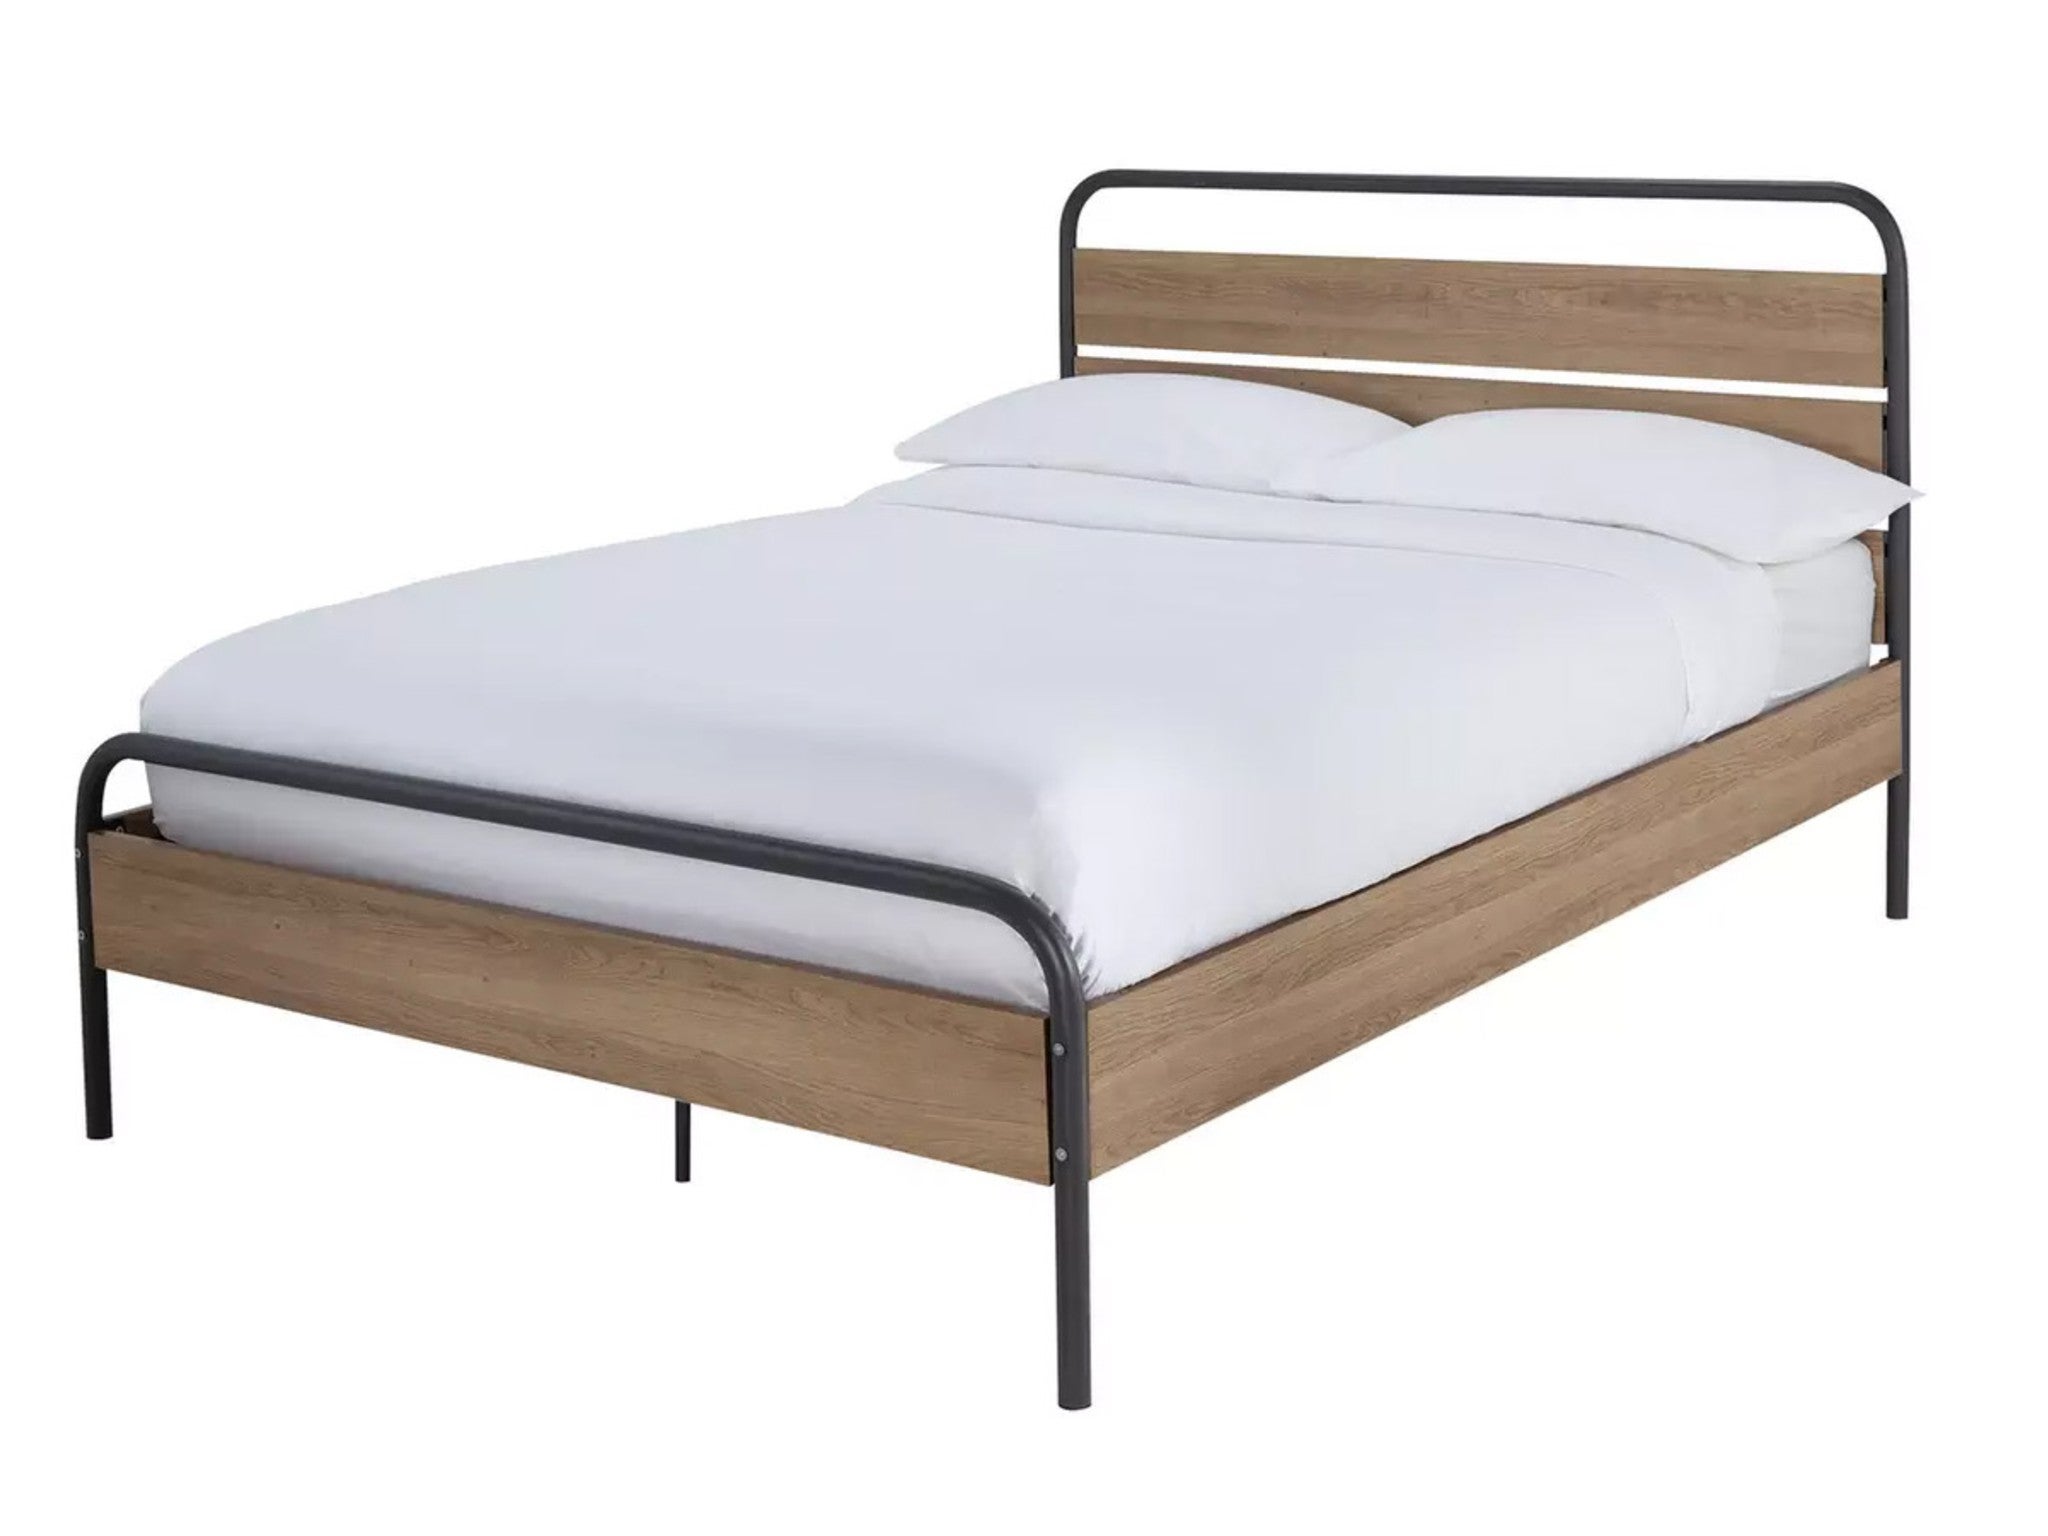 Habitat industrial small double bed frame indybest.jpg